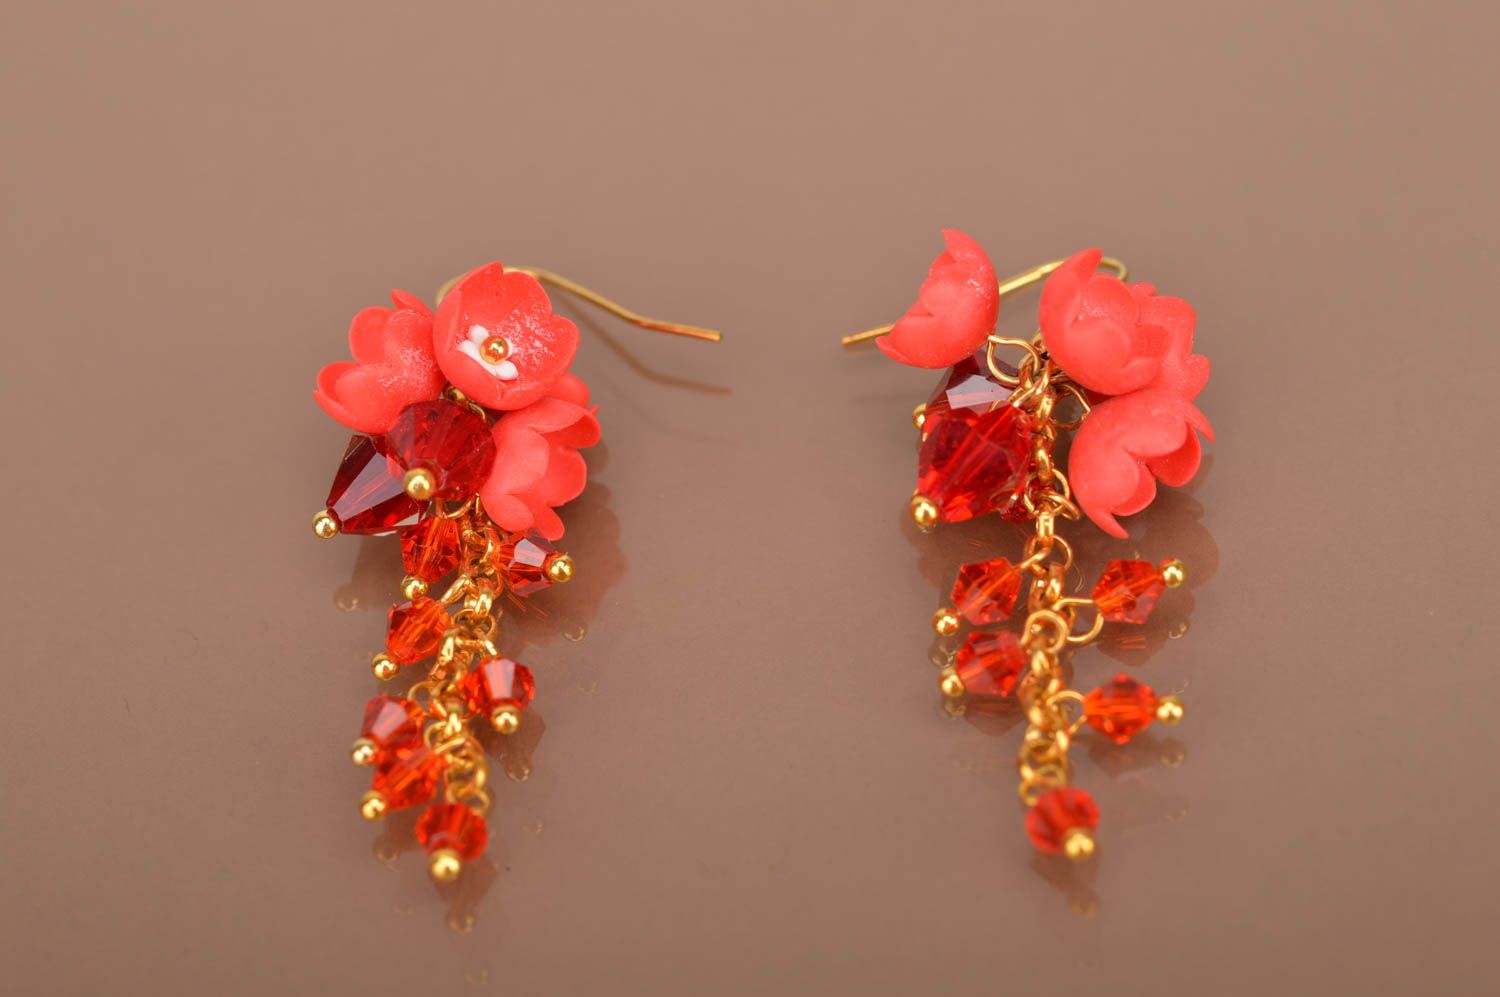 Stylish homemade plastic flower earrings polymer clay ideas jewelry designs photo 4